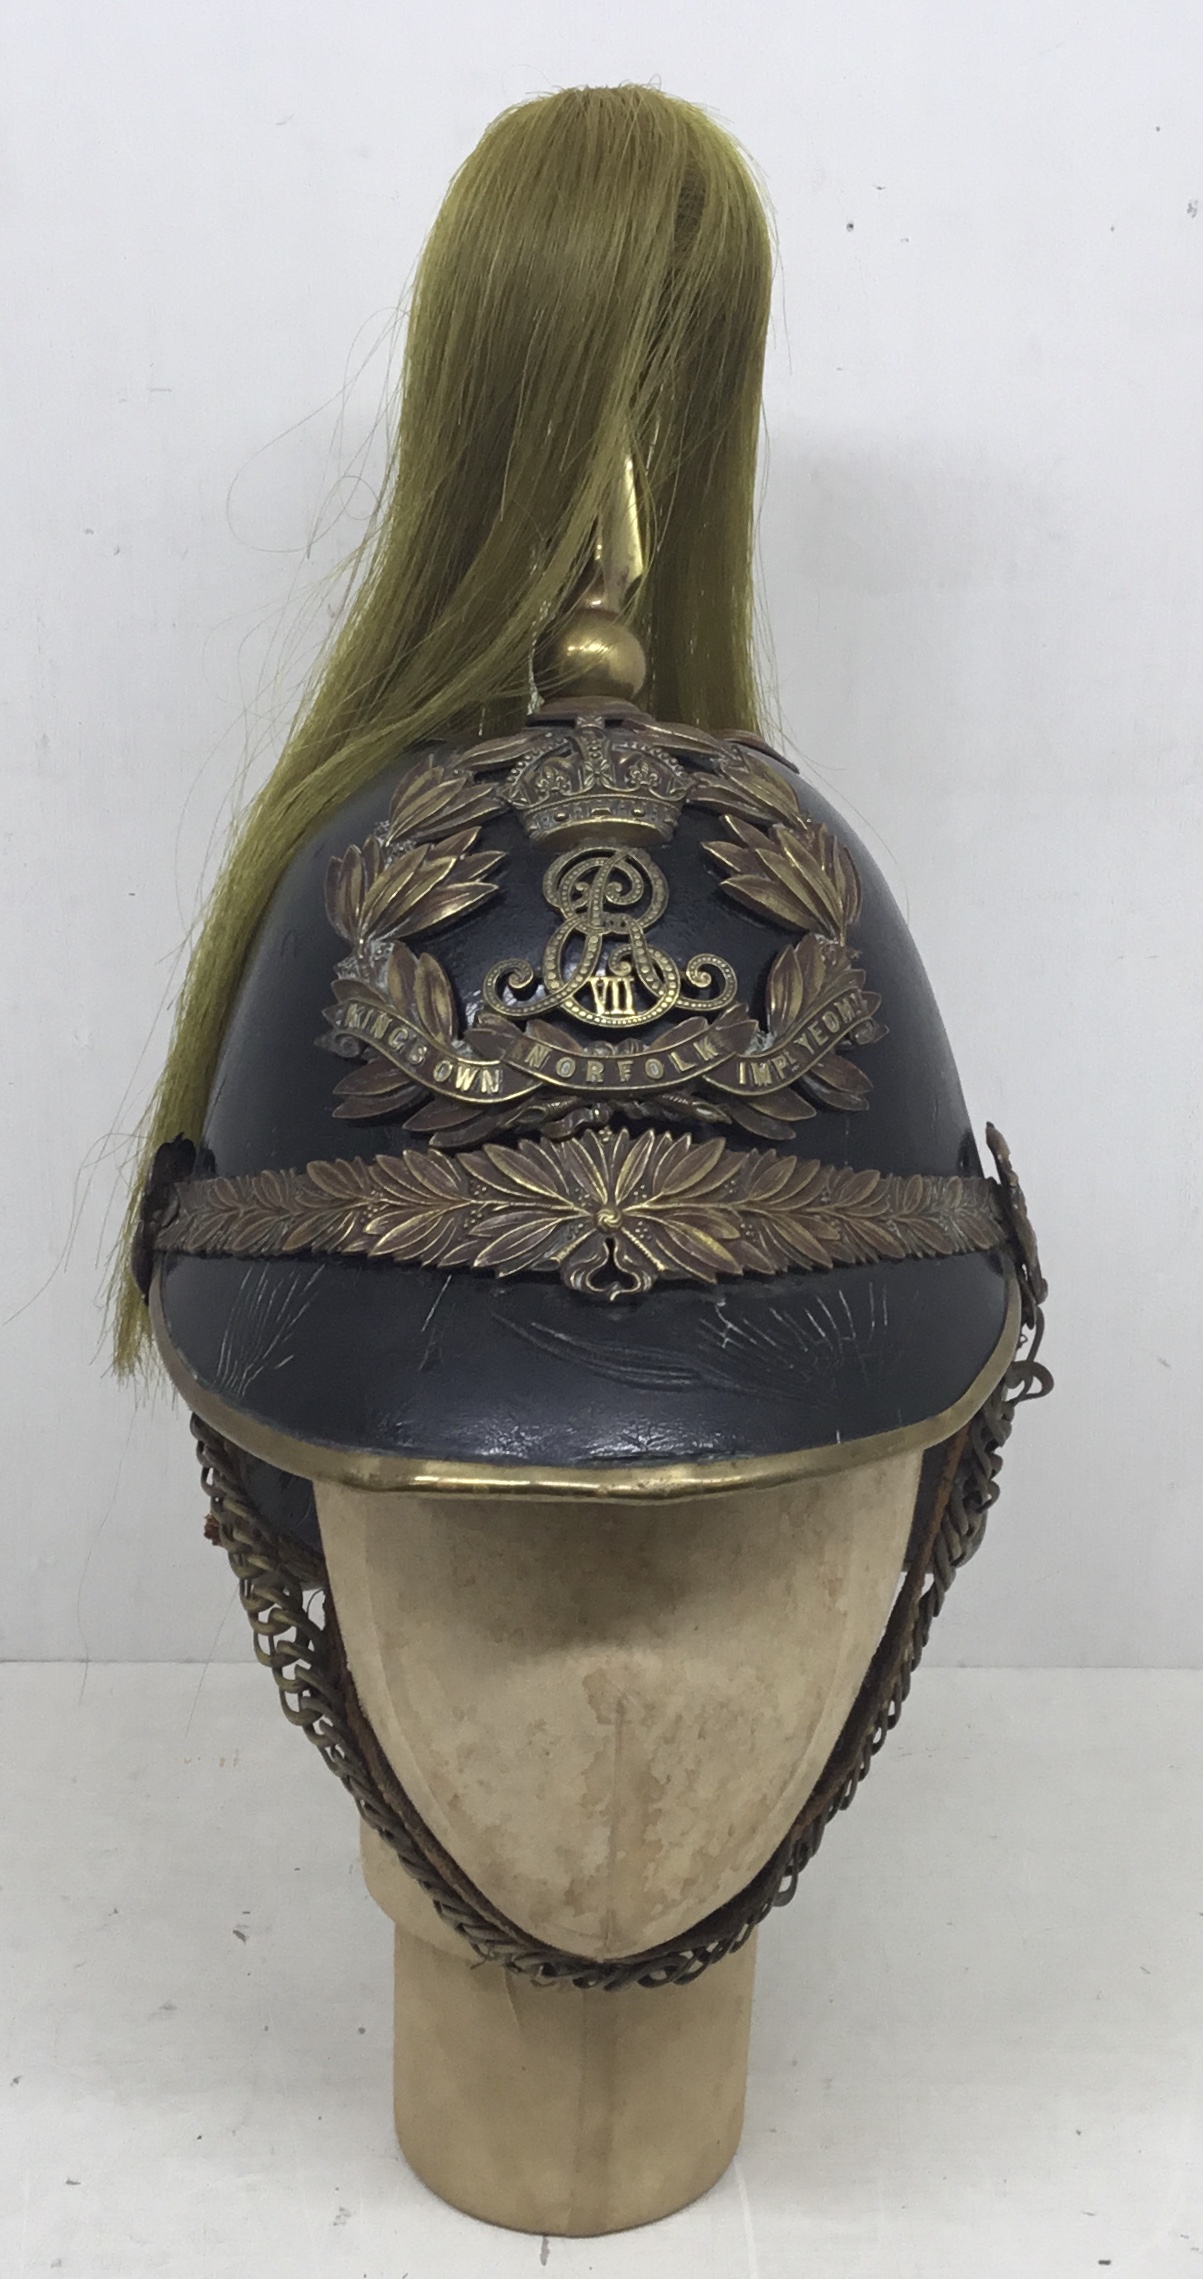 An early 20th century, Edwardian troopers helmet for the King’s Own Norfolk Imperial Yeomanry.